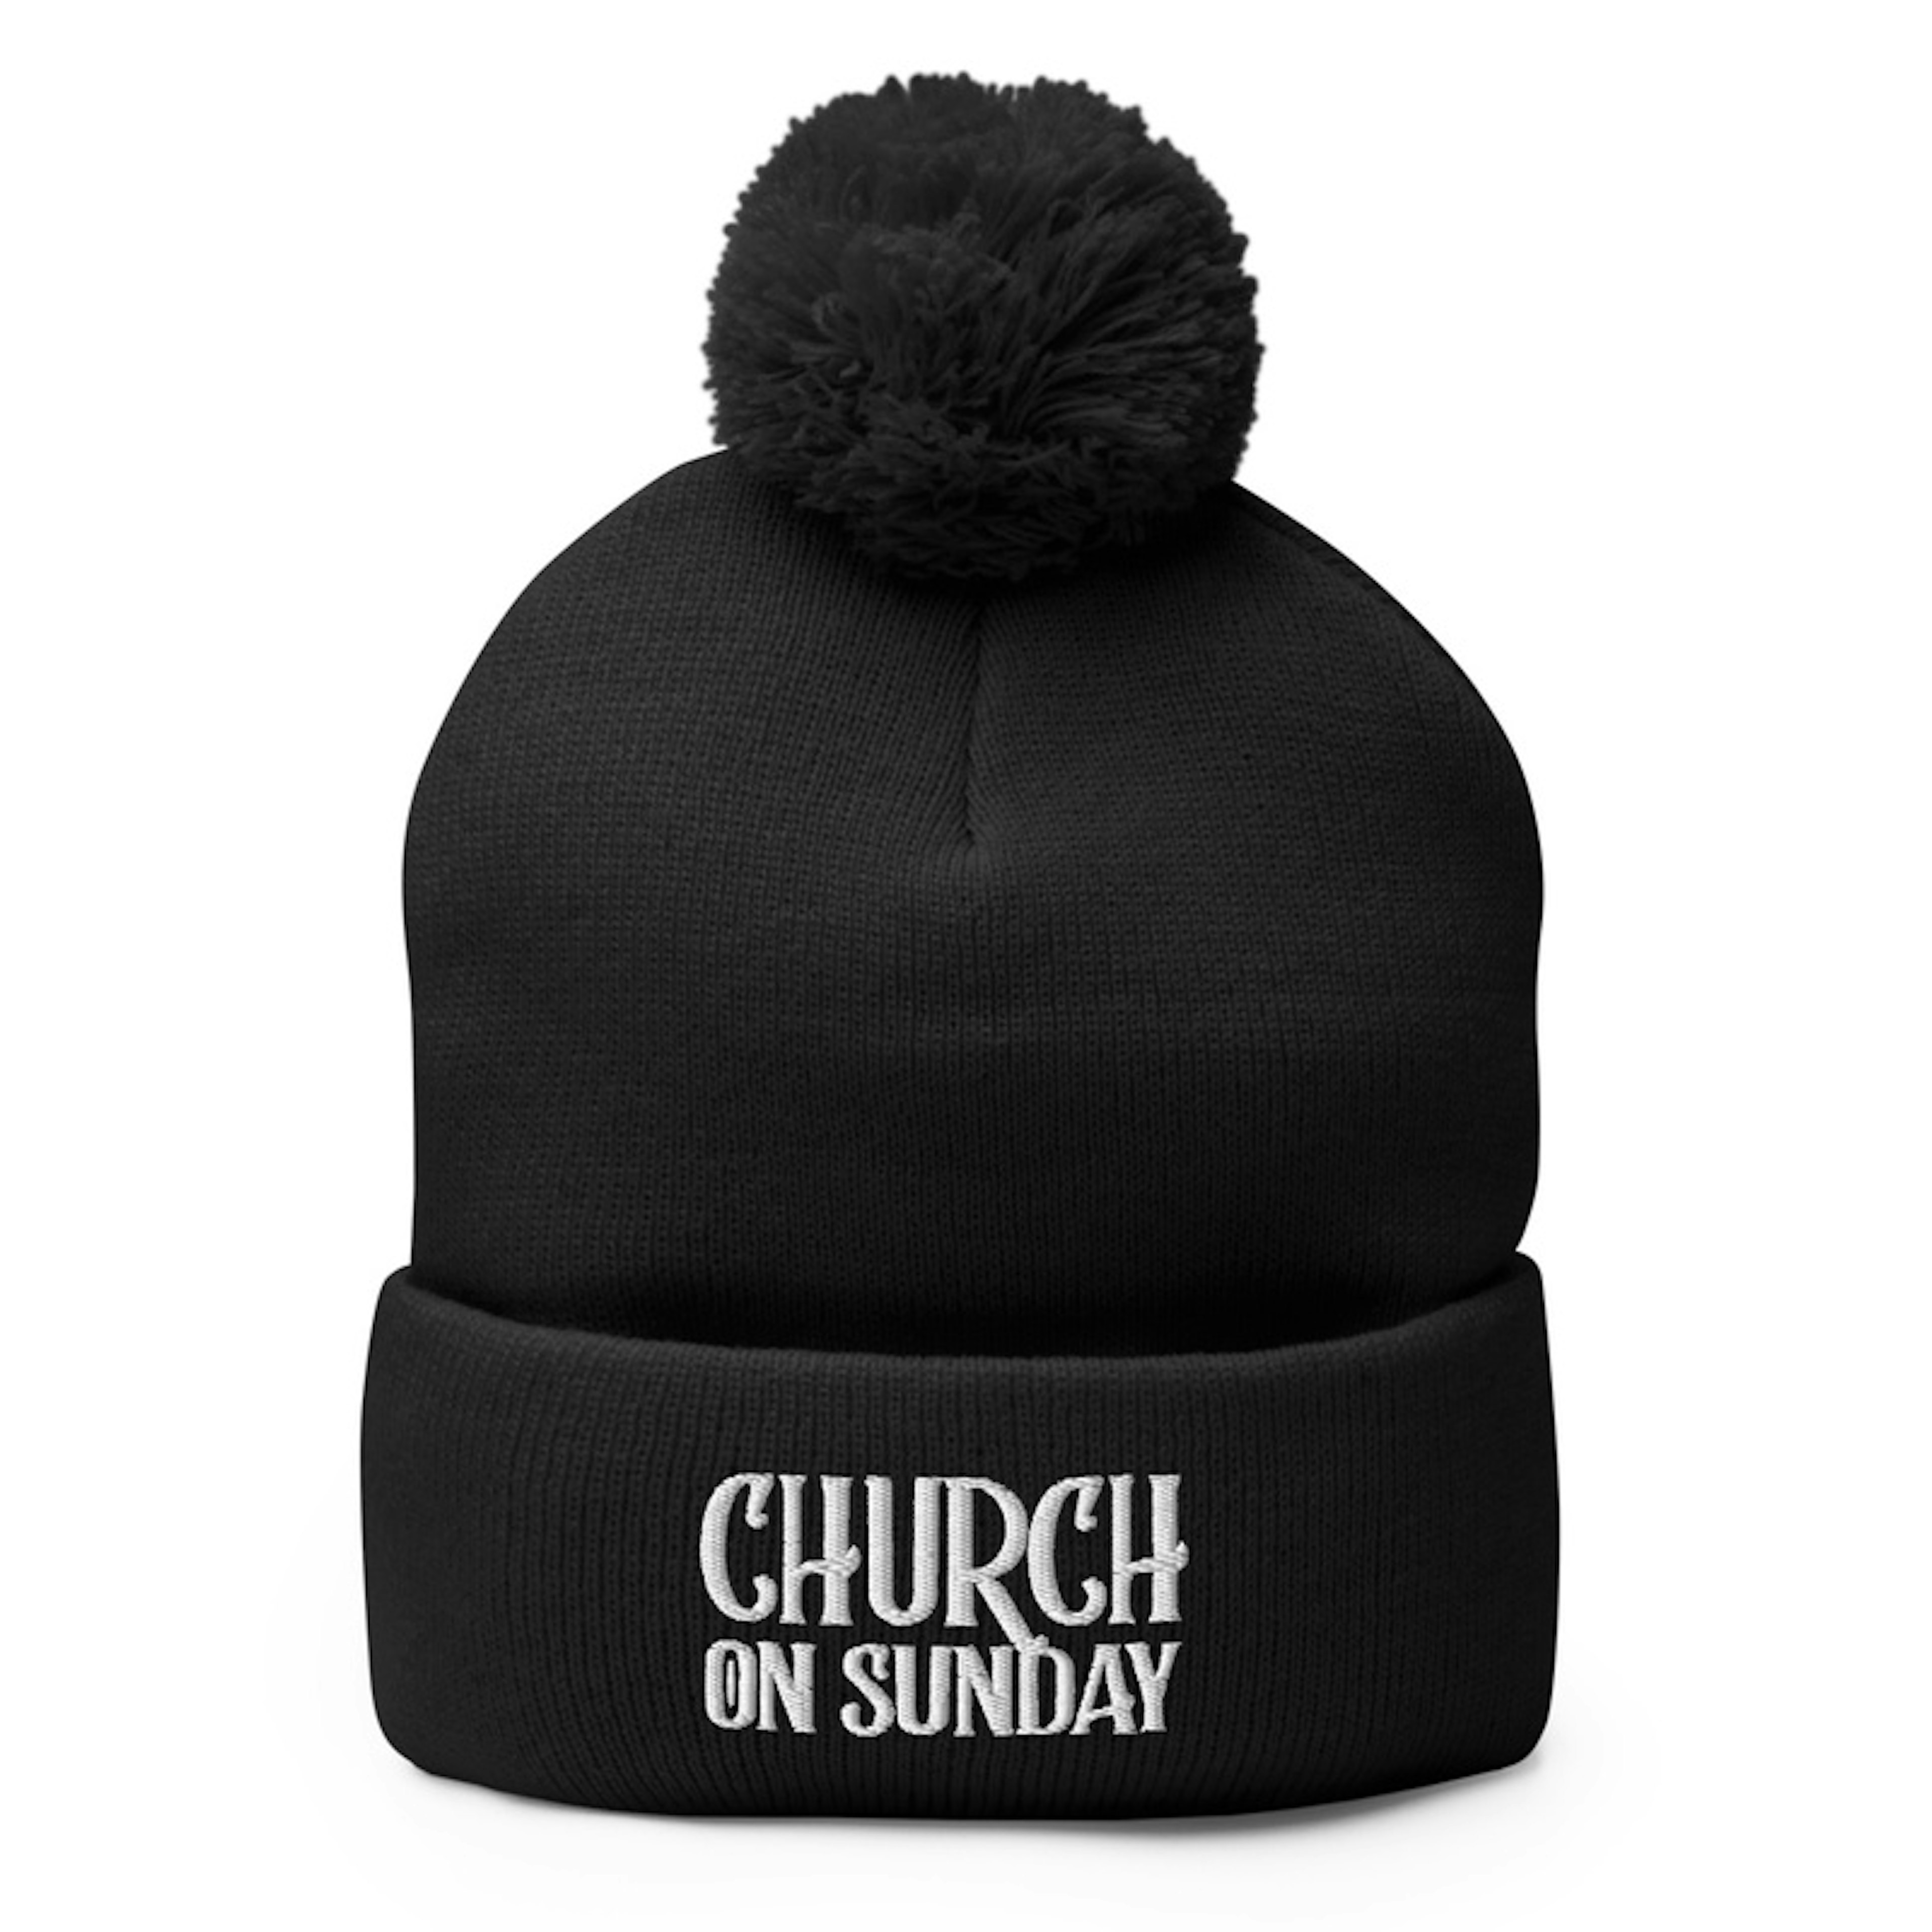 " Church On Sunday " Wooly hat 